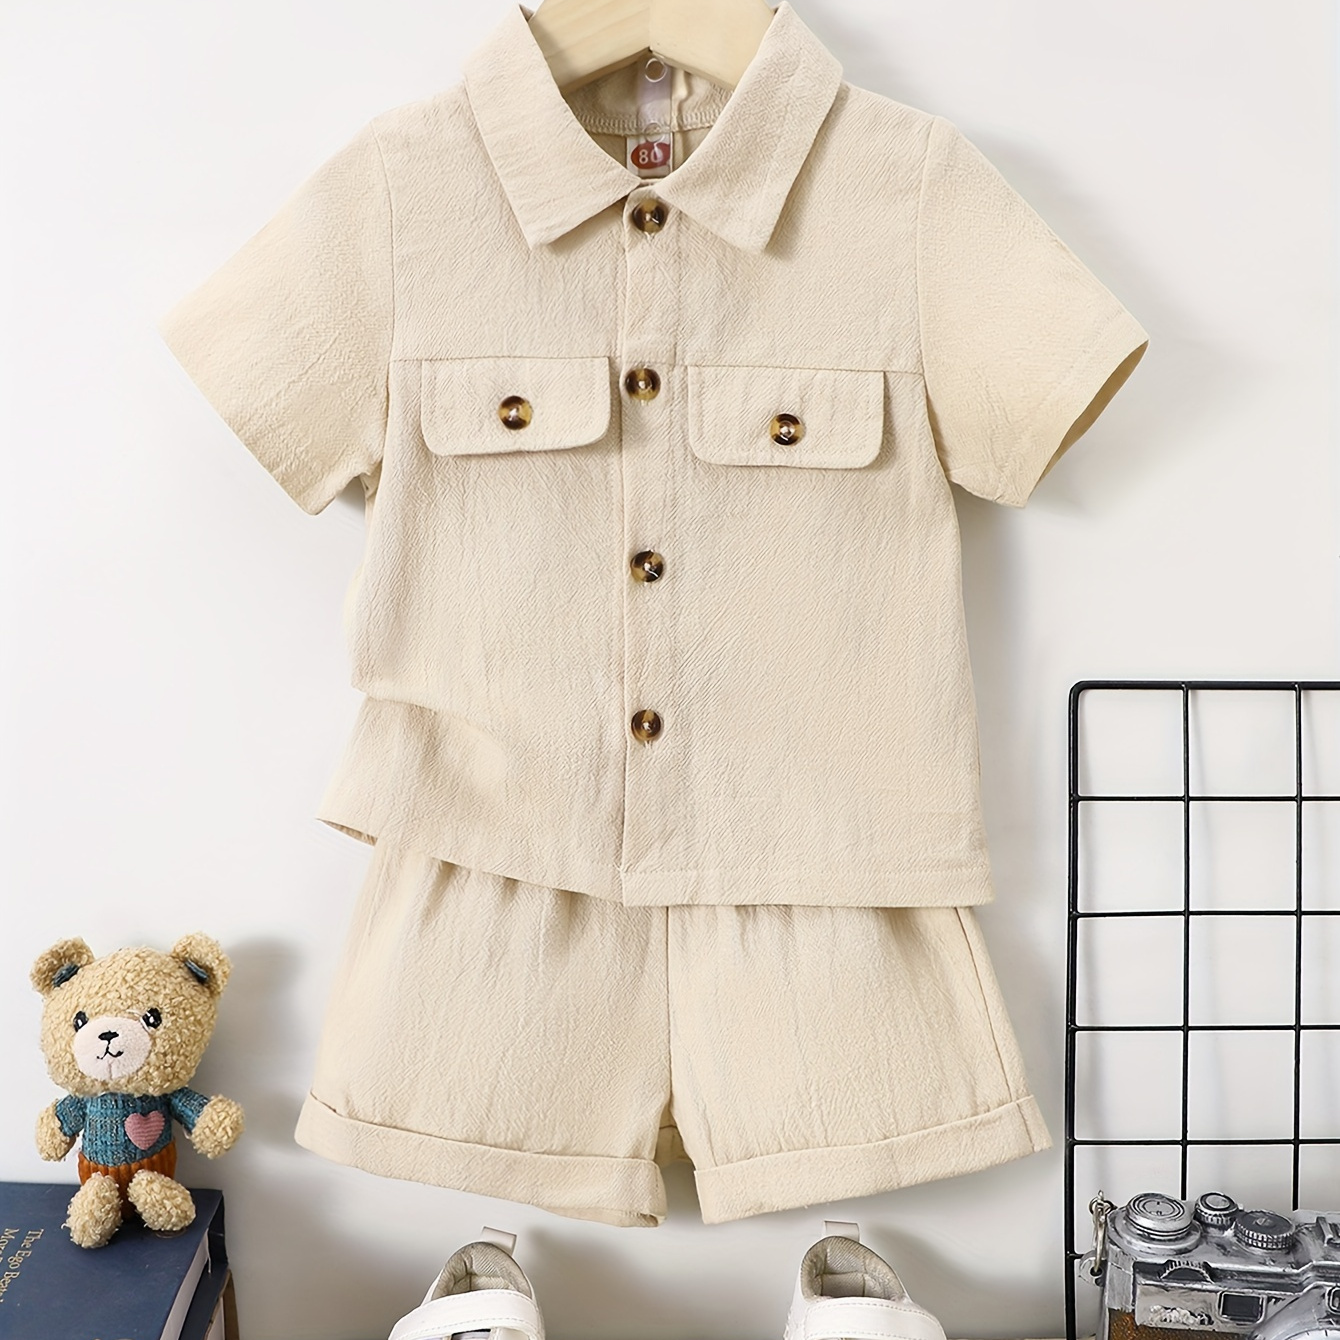 

Baby Boy's Soild Casual Outfit, Short Sleeve Button Shirt + Matching Shorts Set, Toddler Summer Clothing